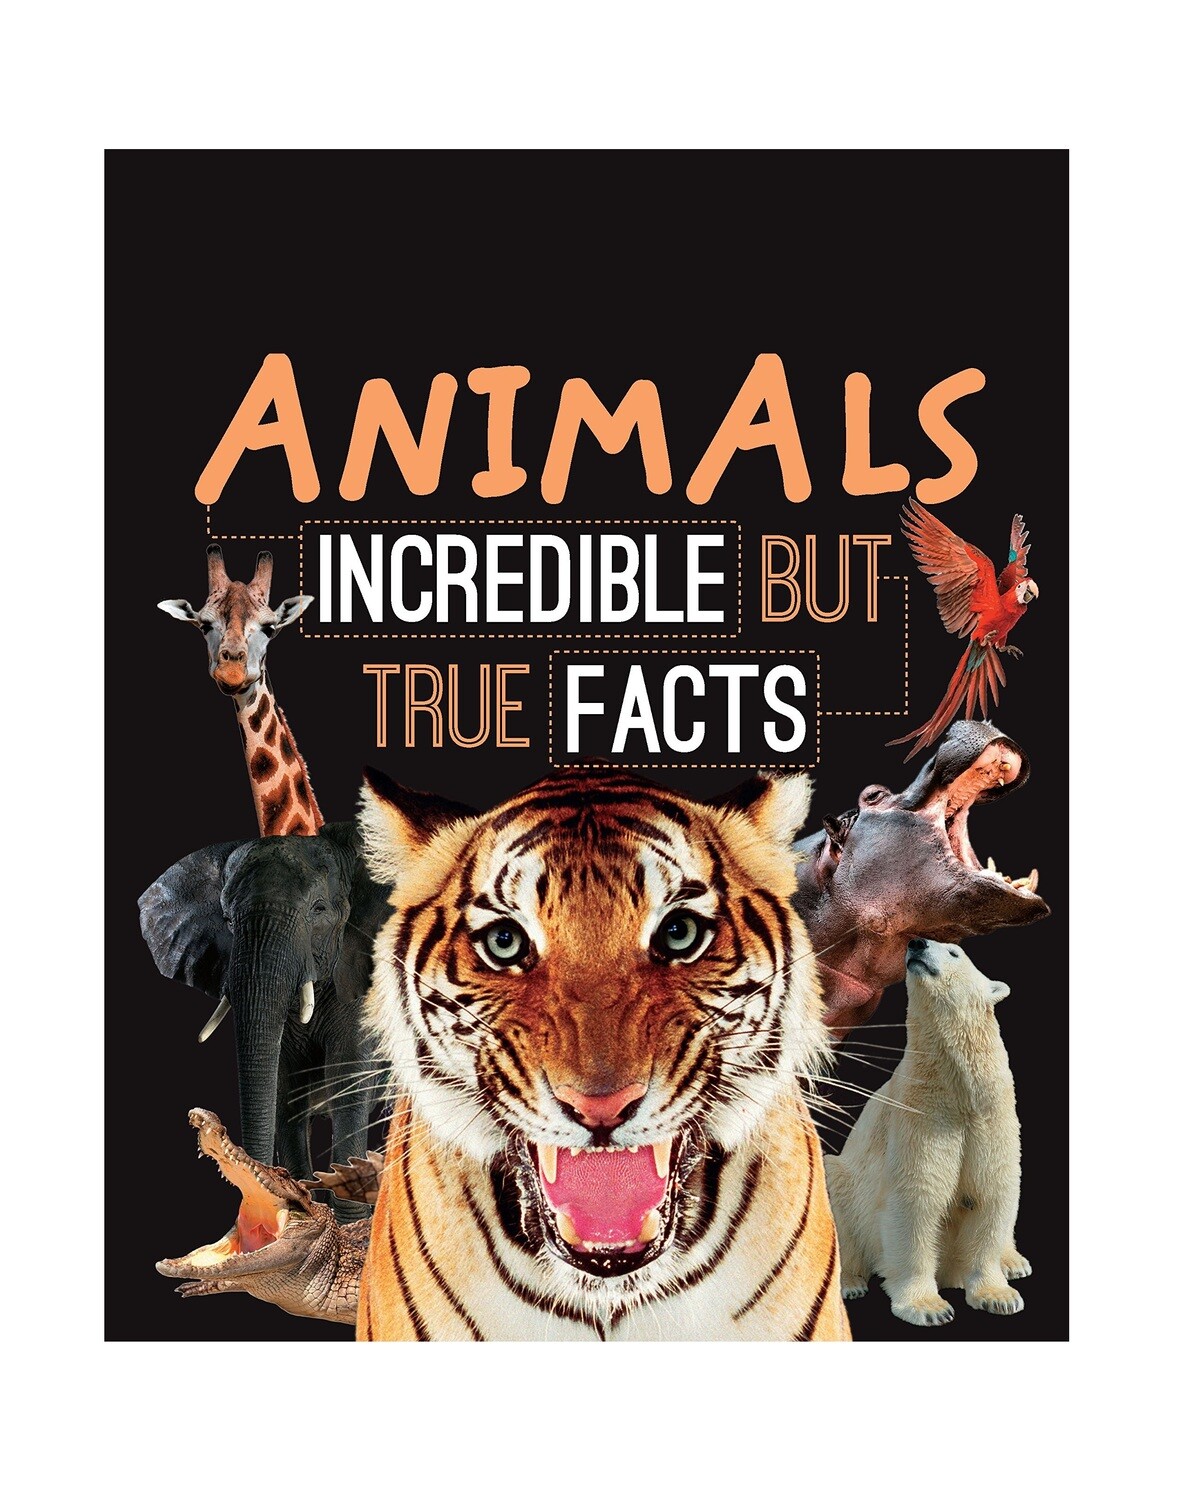 ANIMALS INCREDIBLE BUT TRUE FACTS